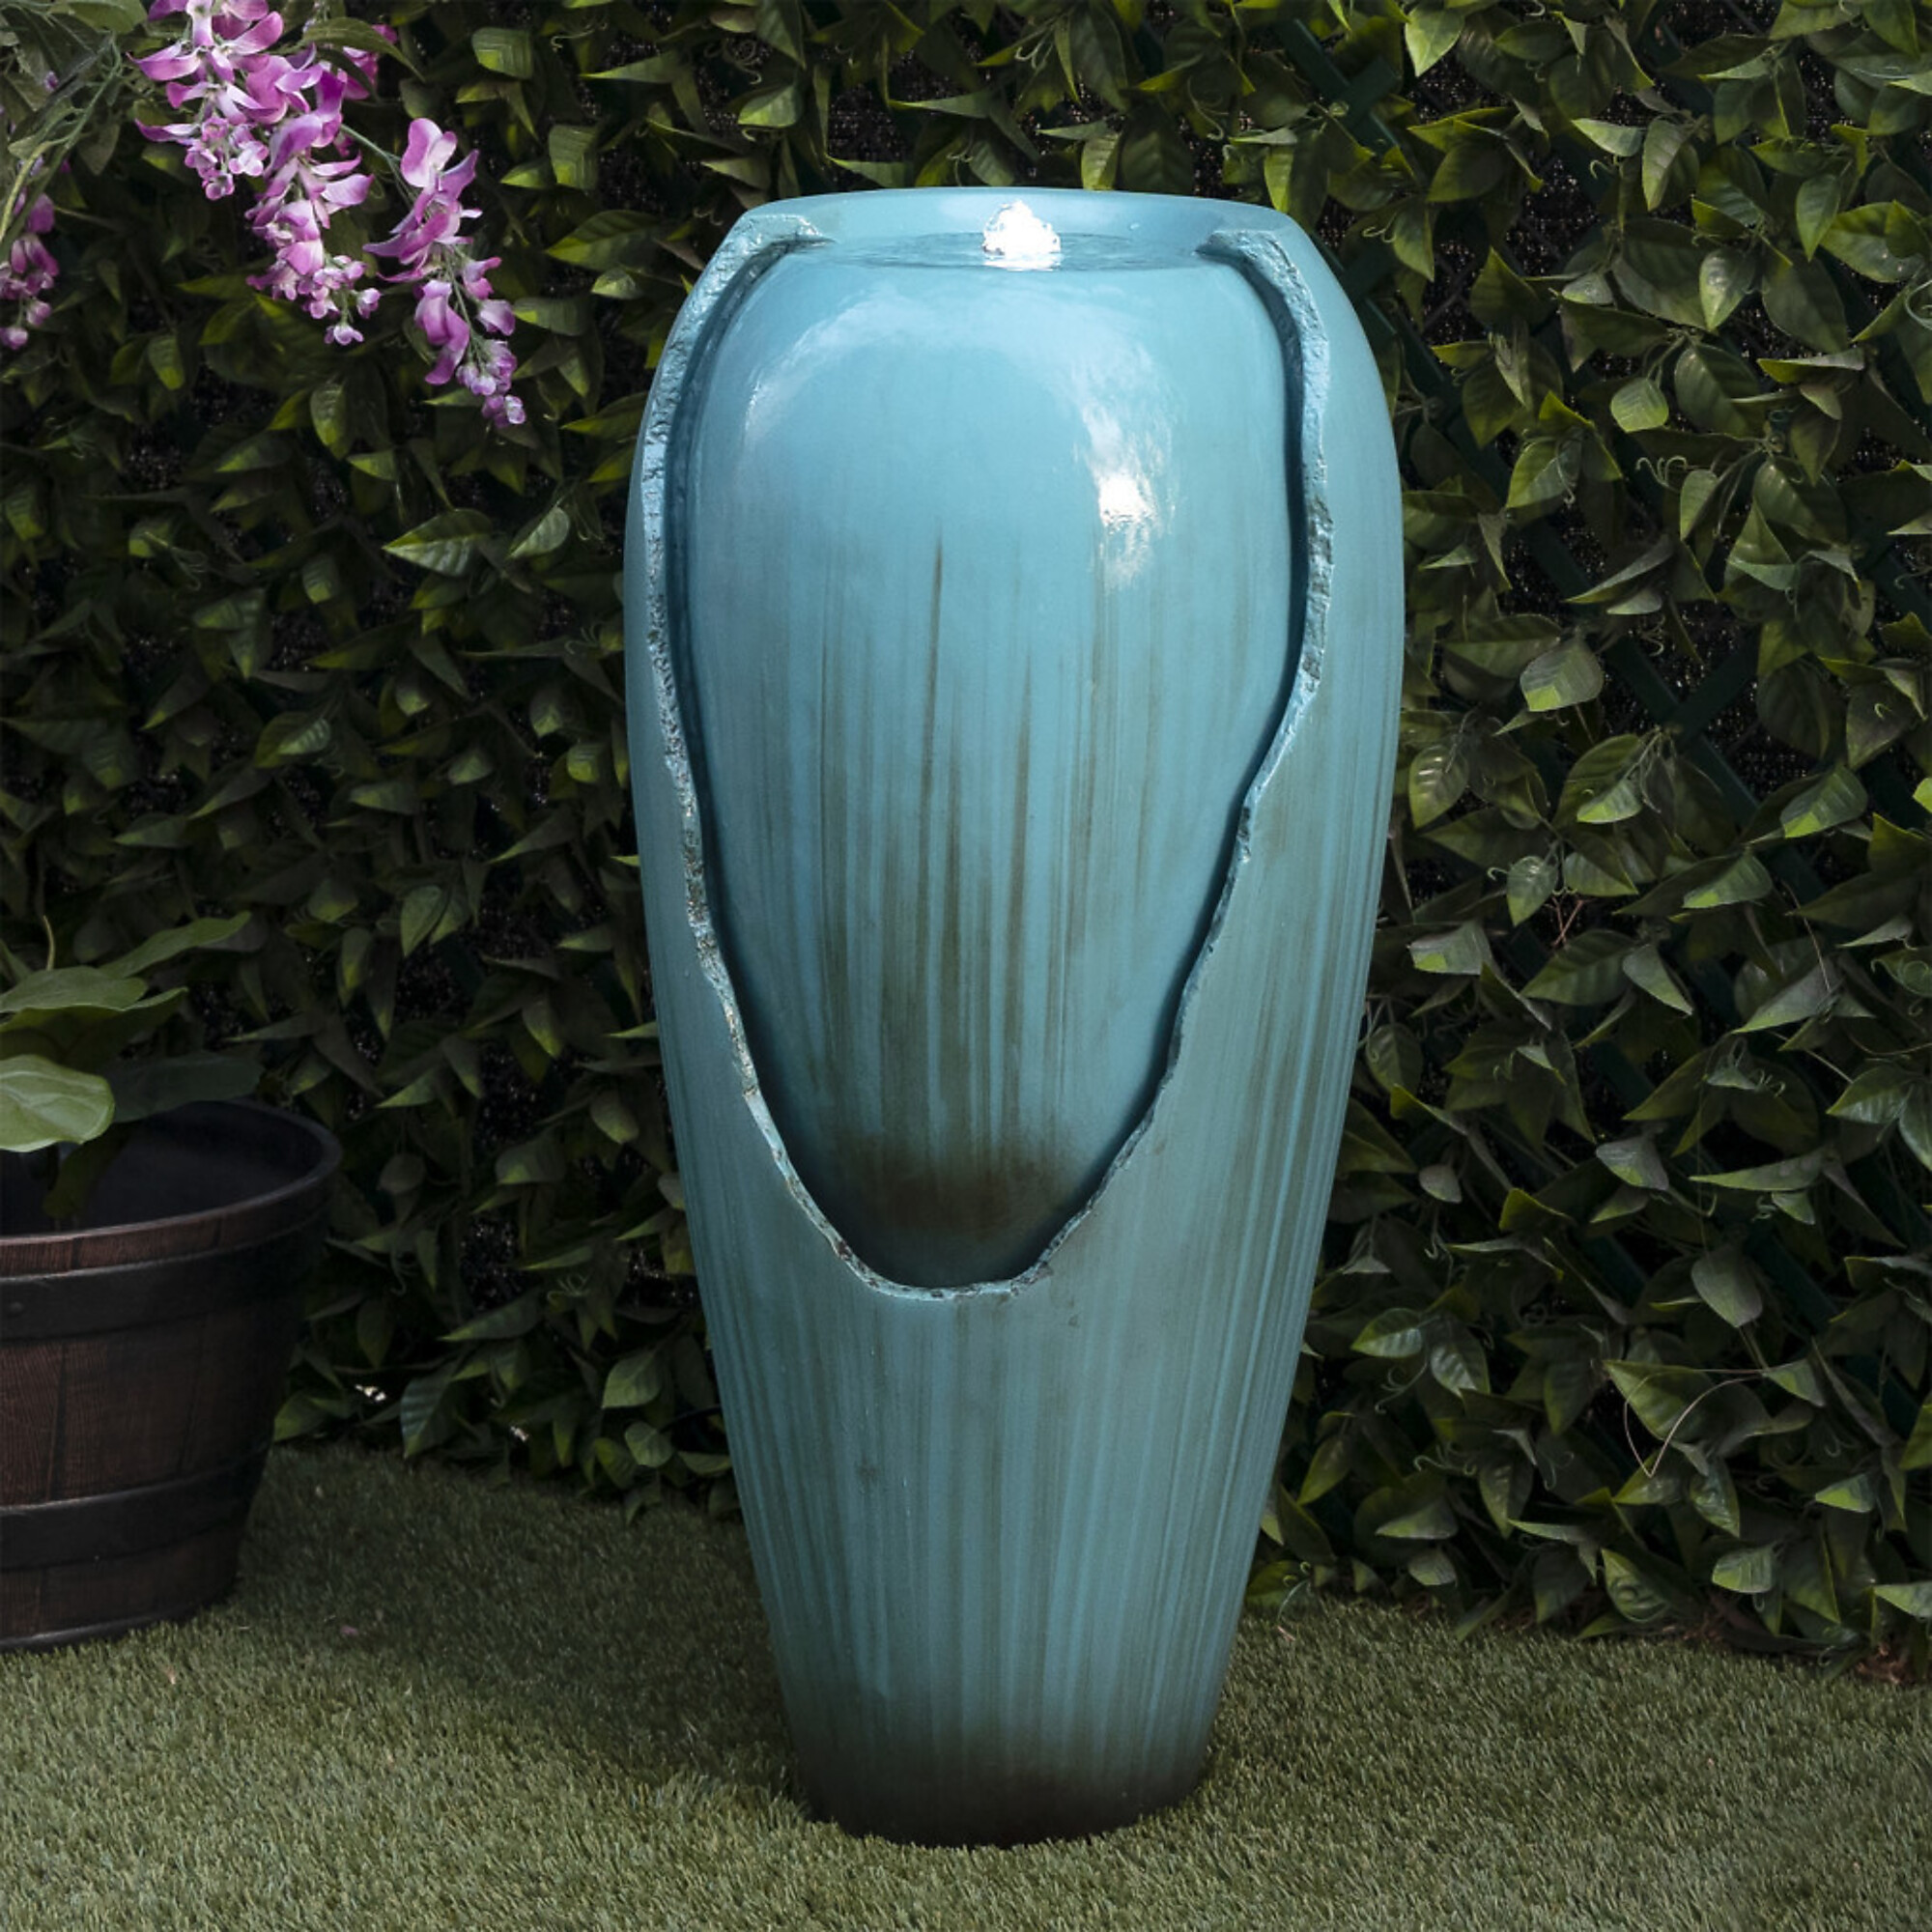 Alpine Corporation, Jar Fountain with LED Lights - Teal, Volts 120 Power Cord Length 6 ft, Model DIG100XS